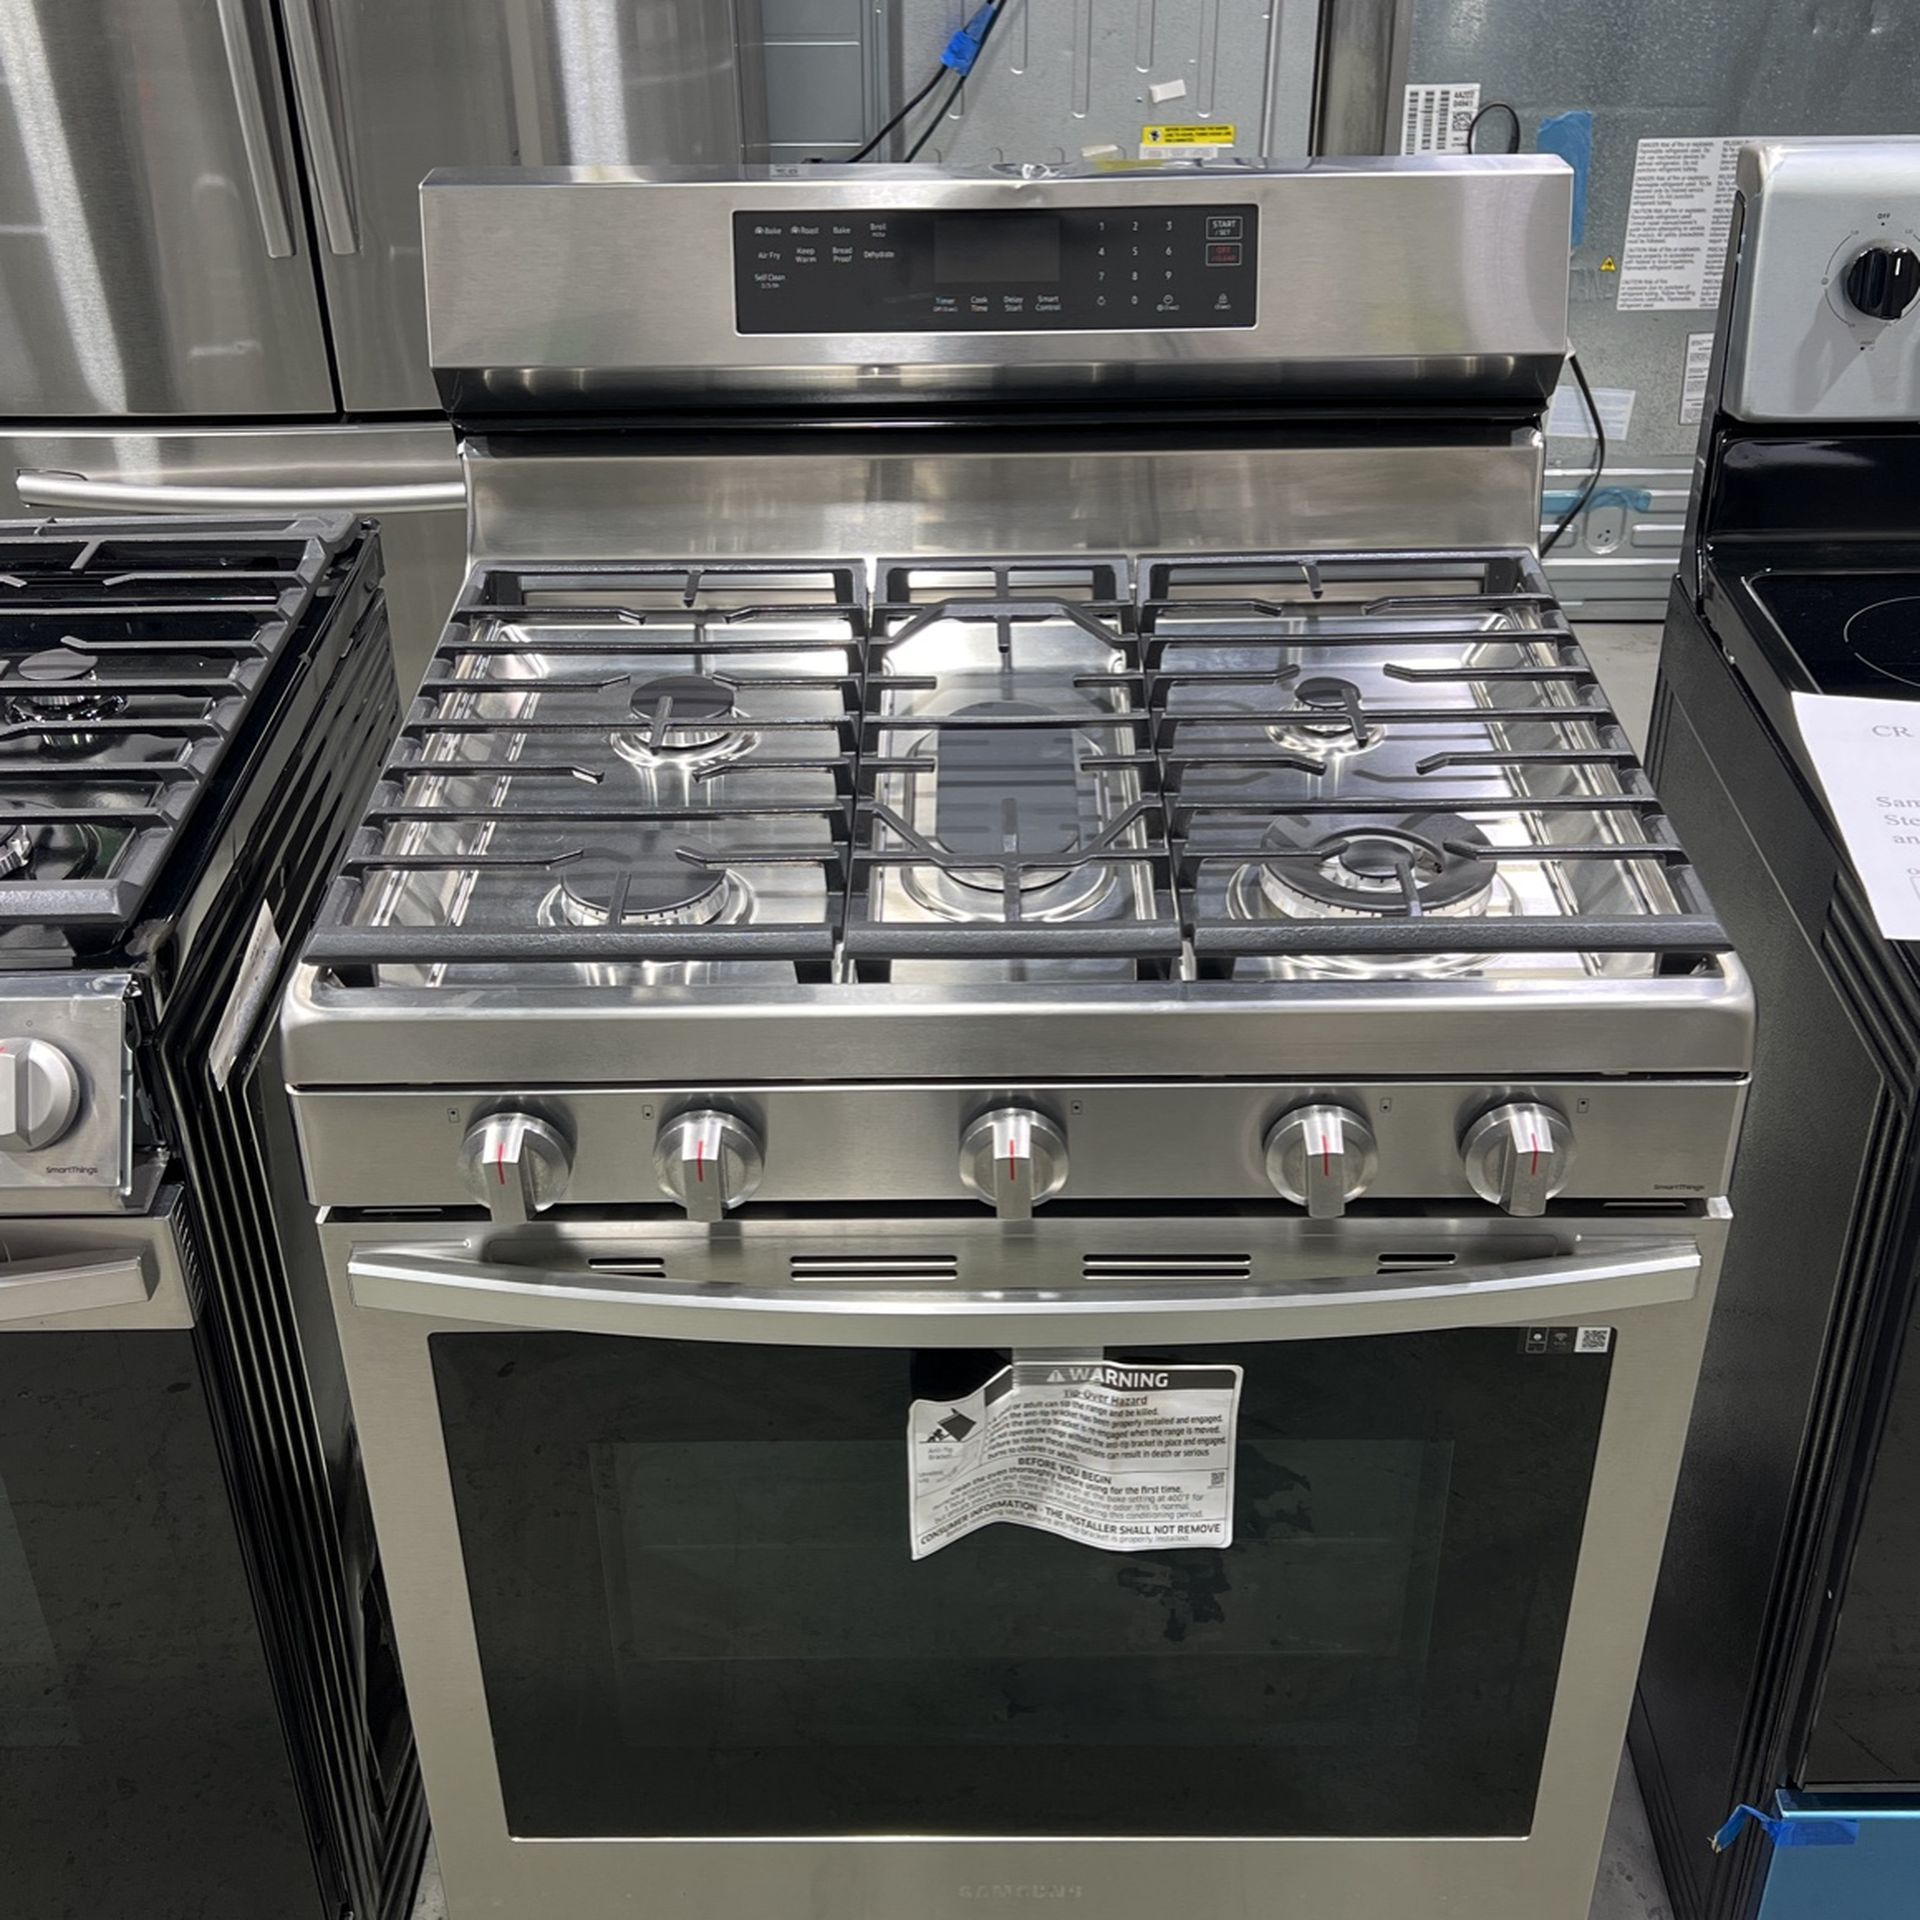 Samsung- 30" Stainless Steel Gas Range (Scratch and Dent)